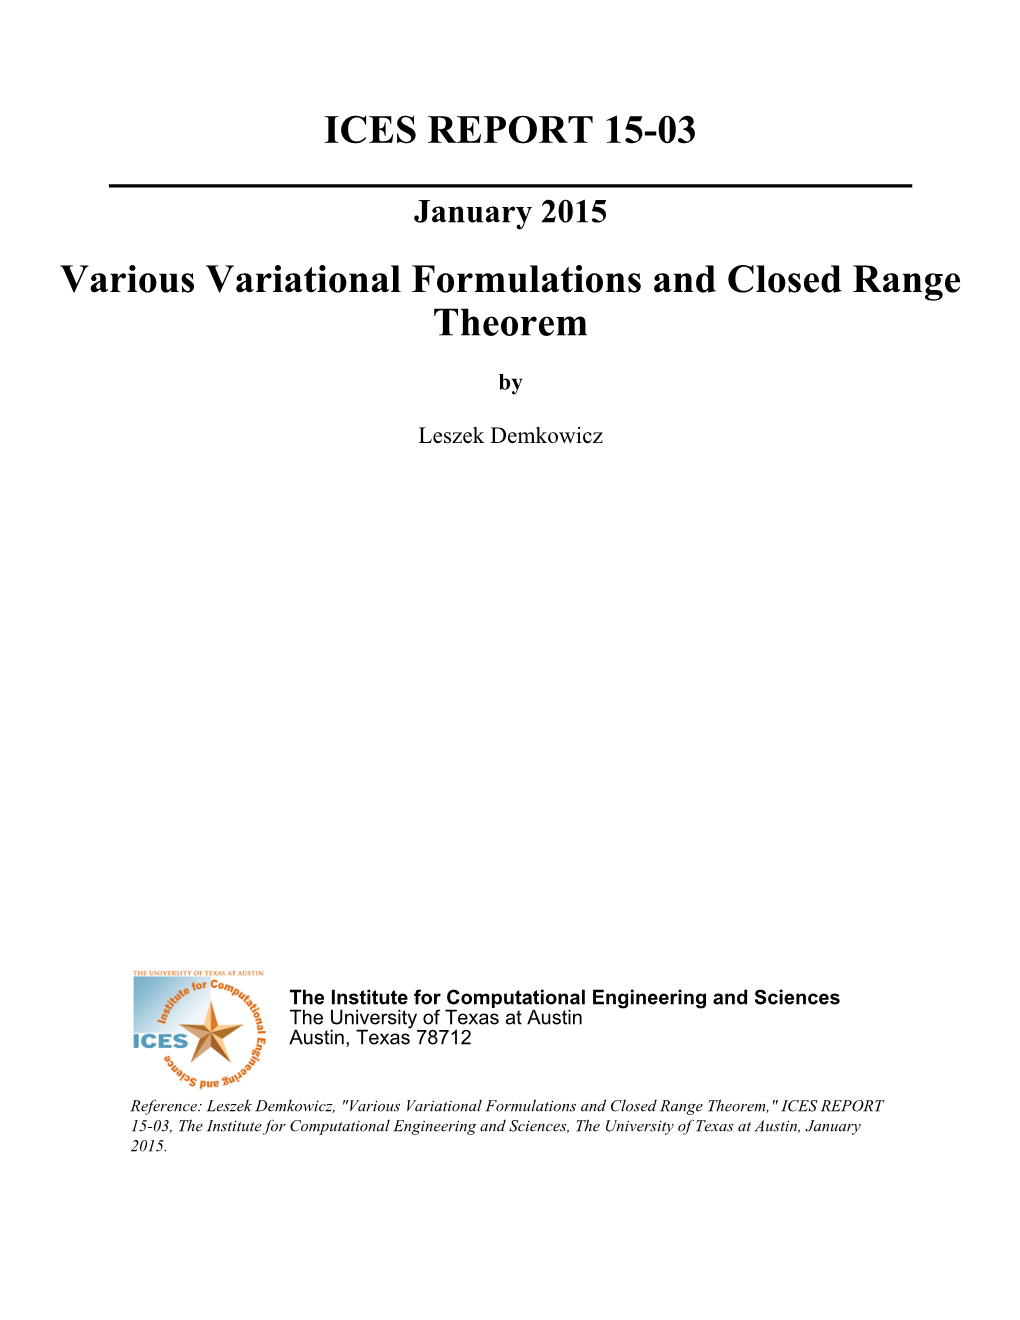 ICES REPORT 15-03 Various Variational Formulations And